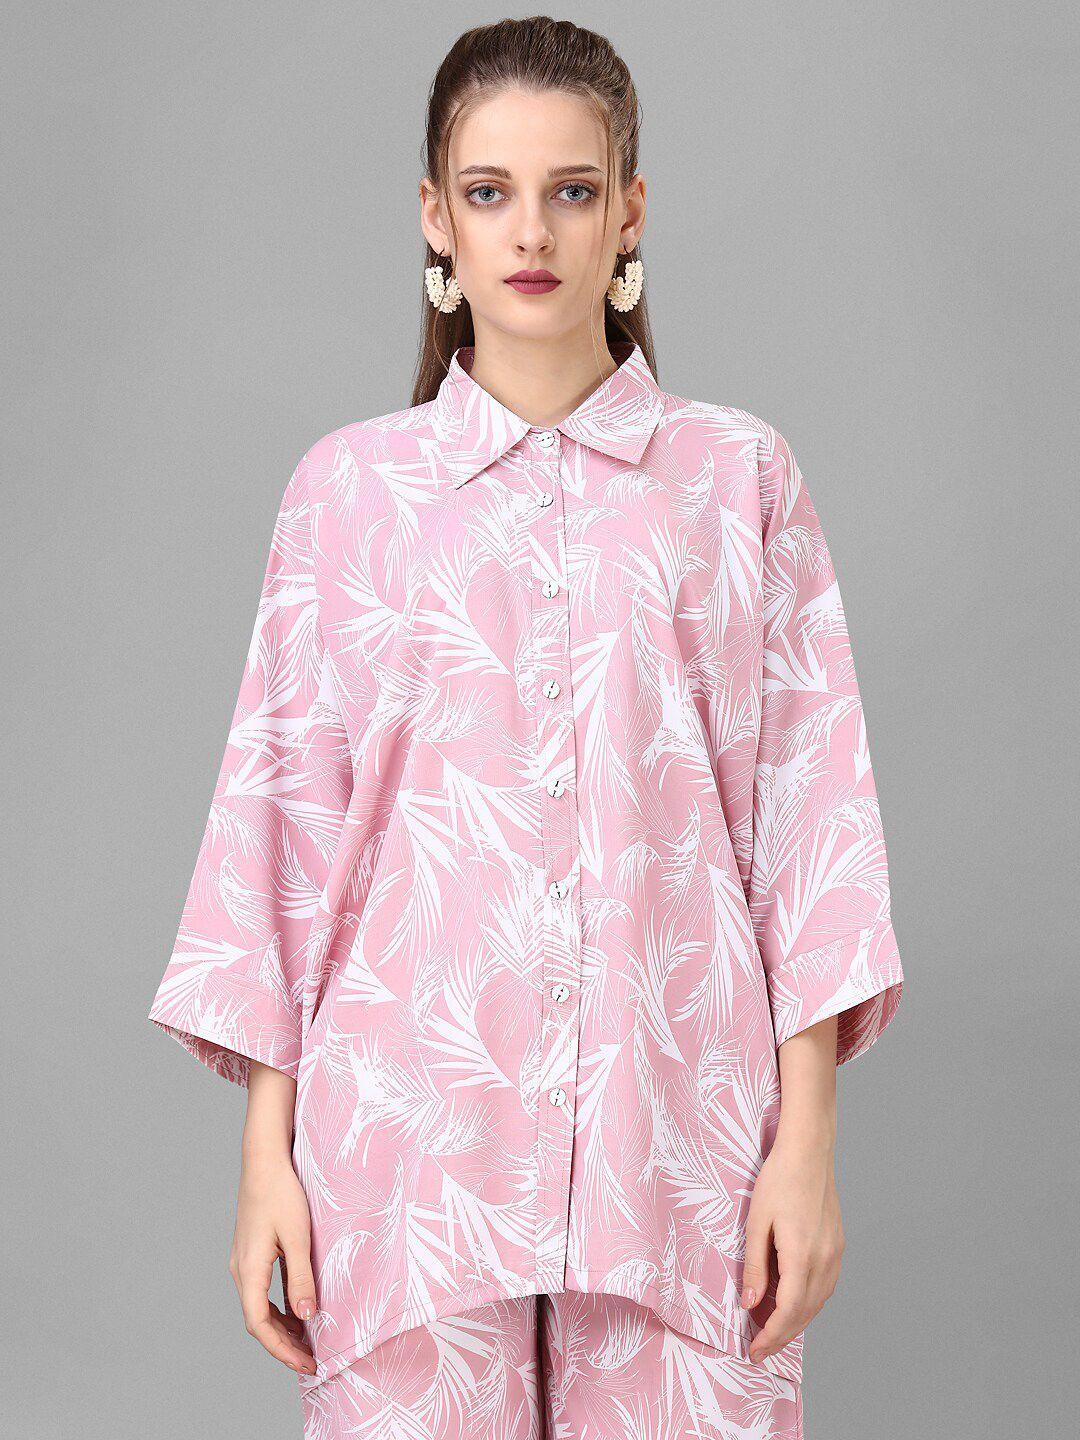 house of mira printed shirt with trousers co-ords